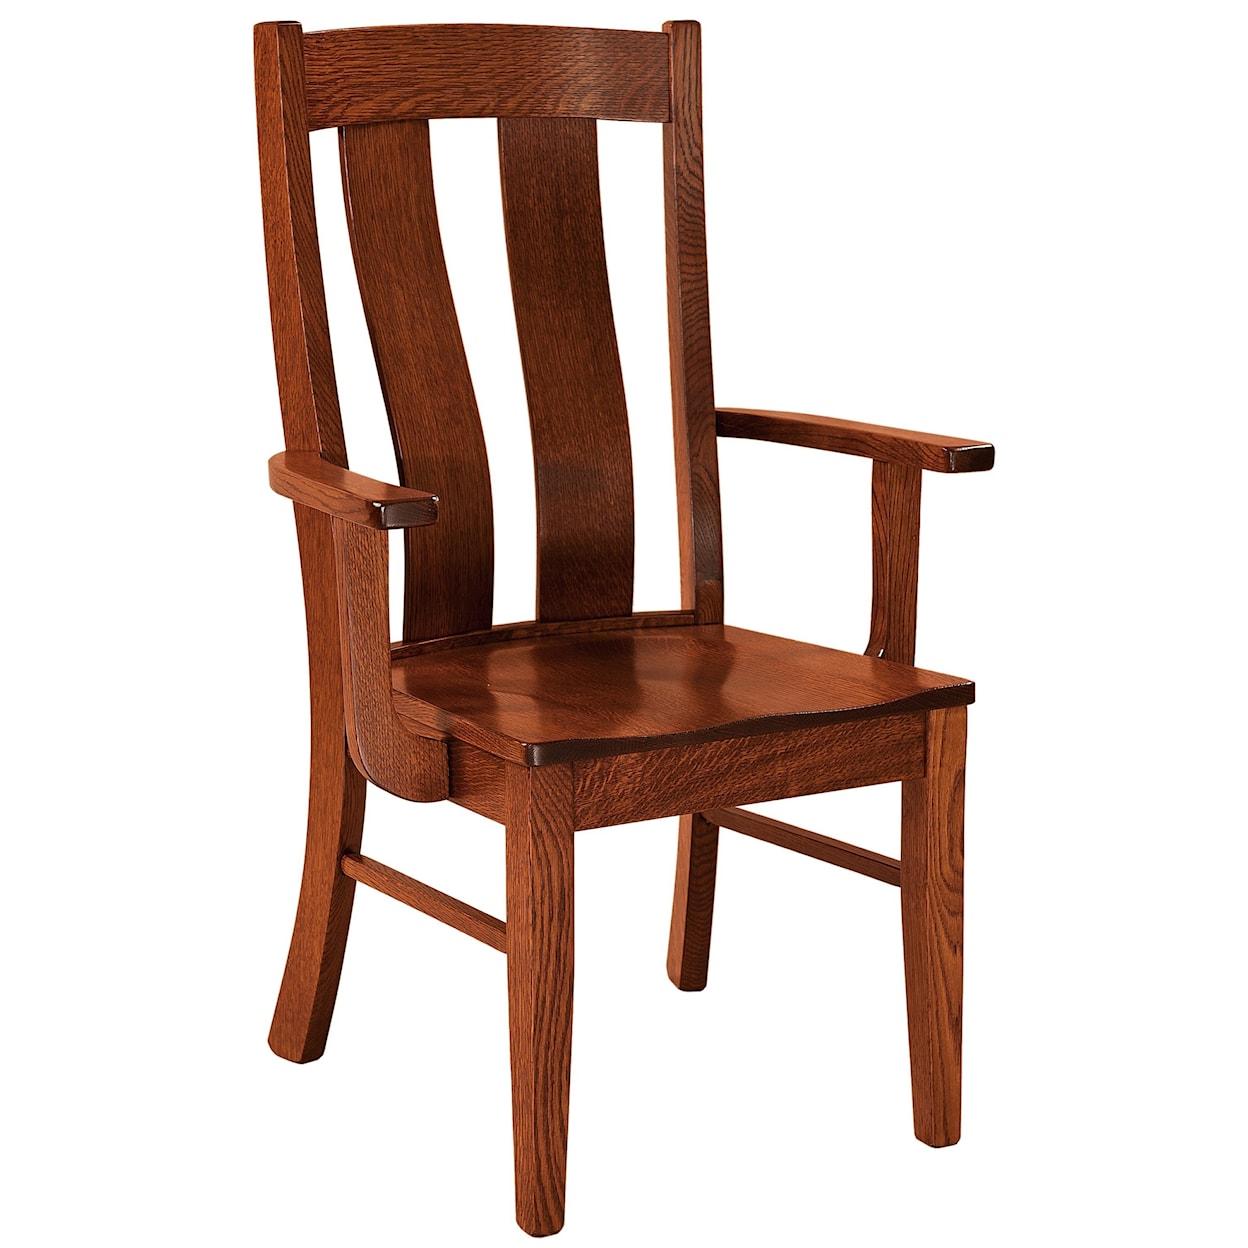 F&N Woodworking Laurie Arm Chair - Leather Seat